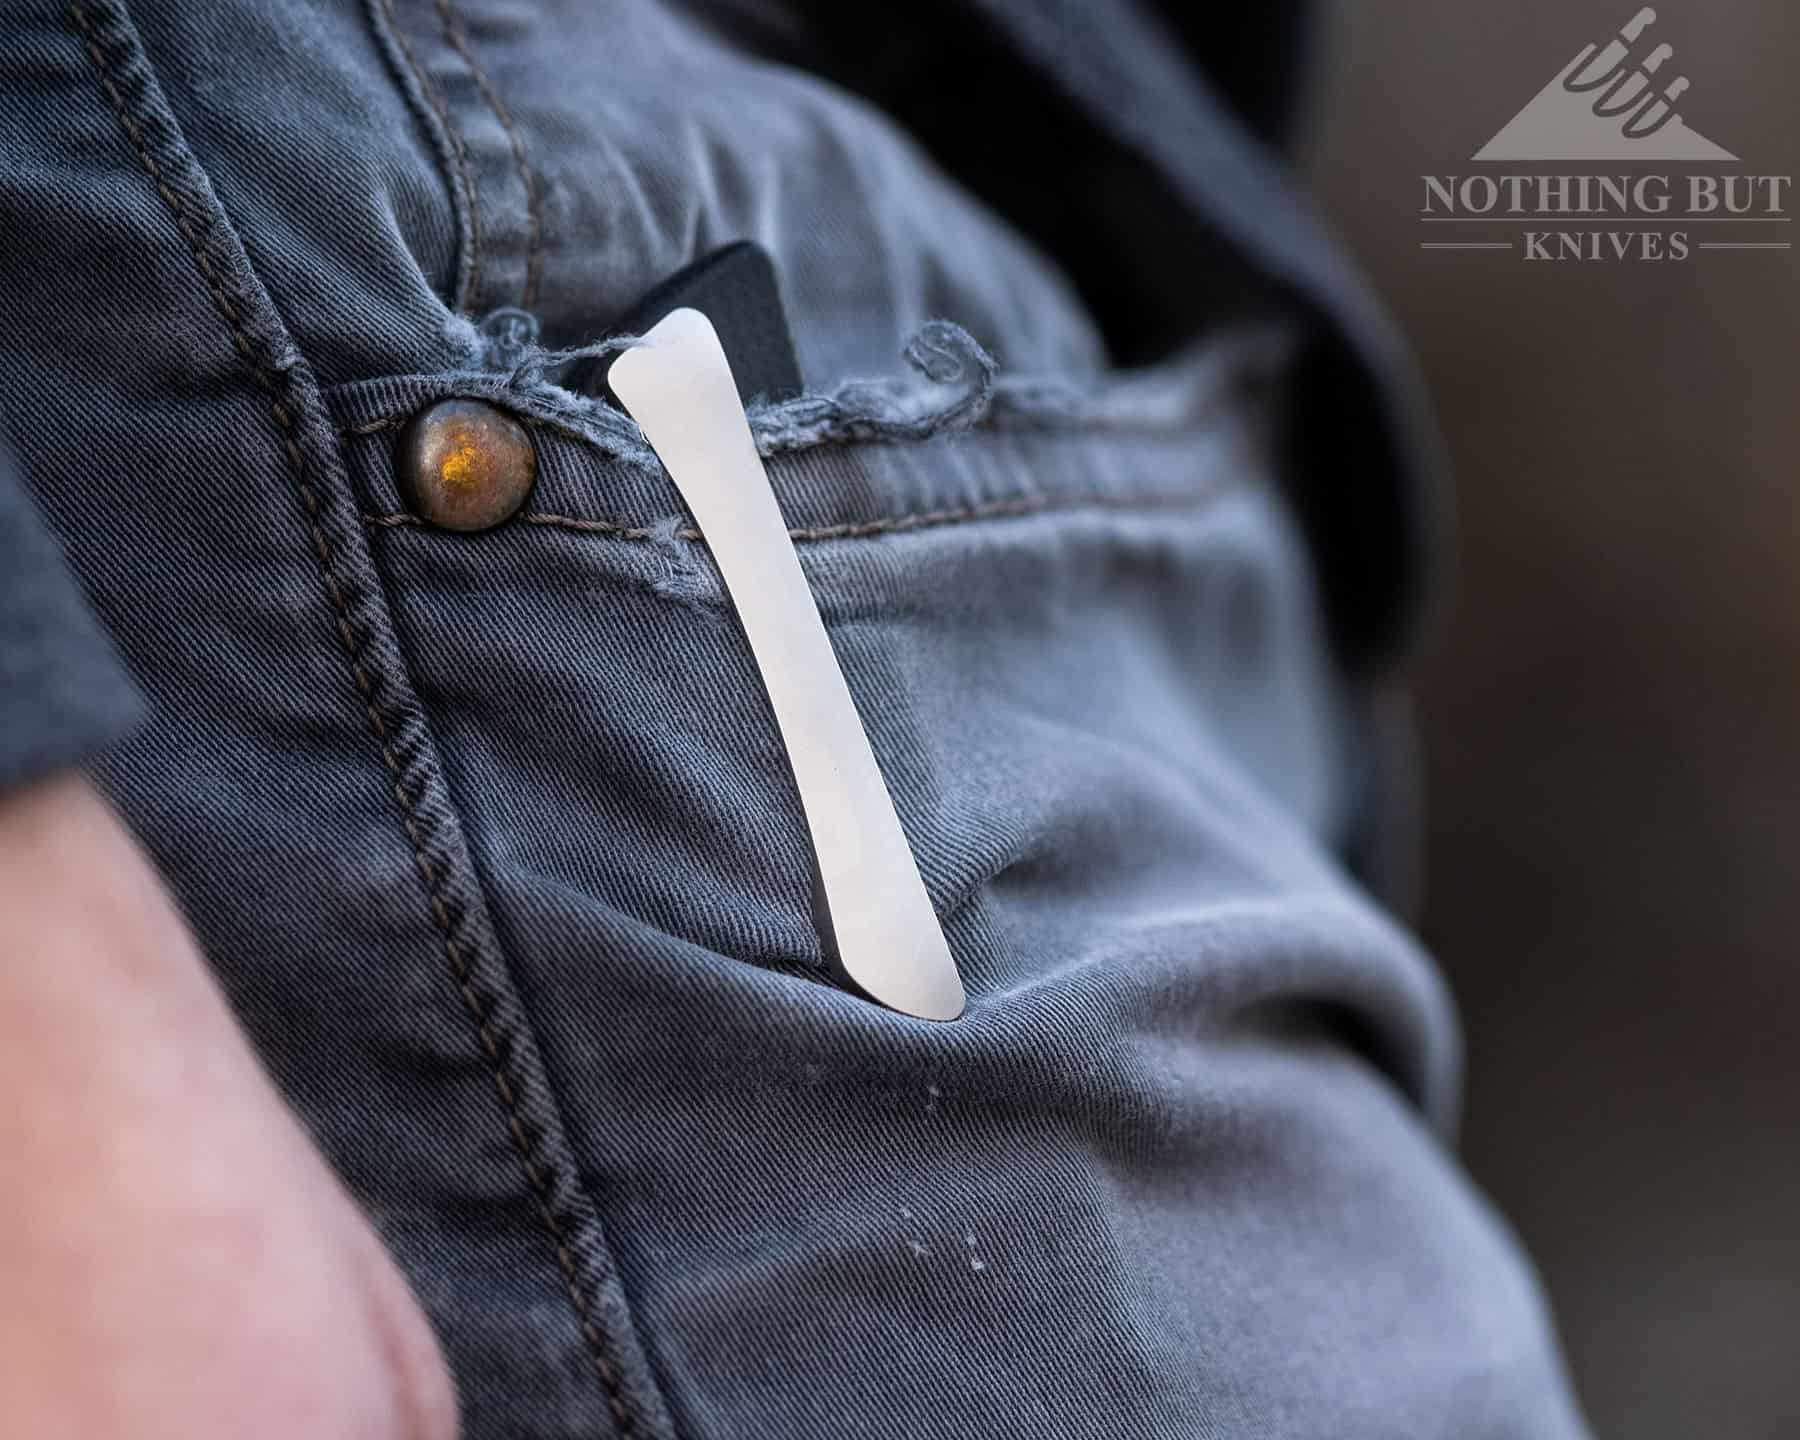 The Ahab's pocket clip sports a stylish design, and it is made of titanium. 